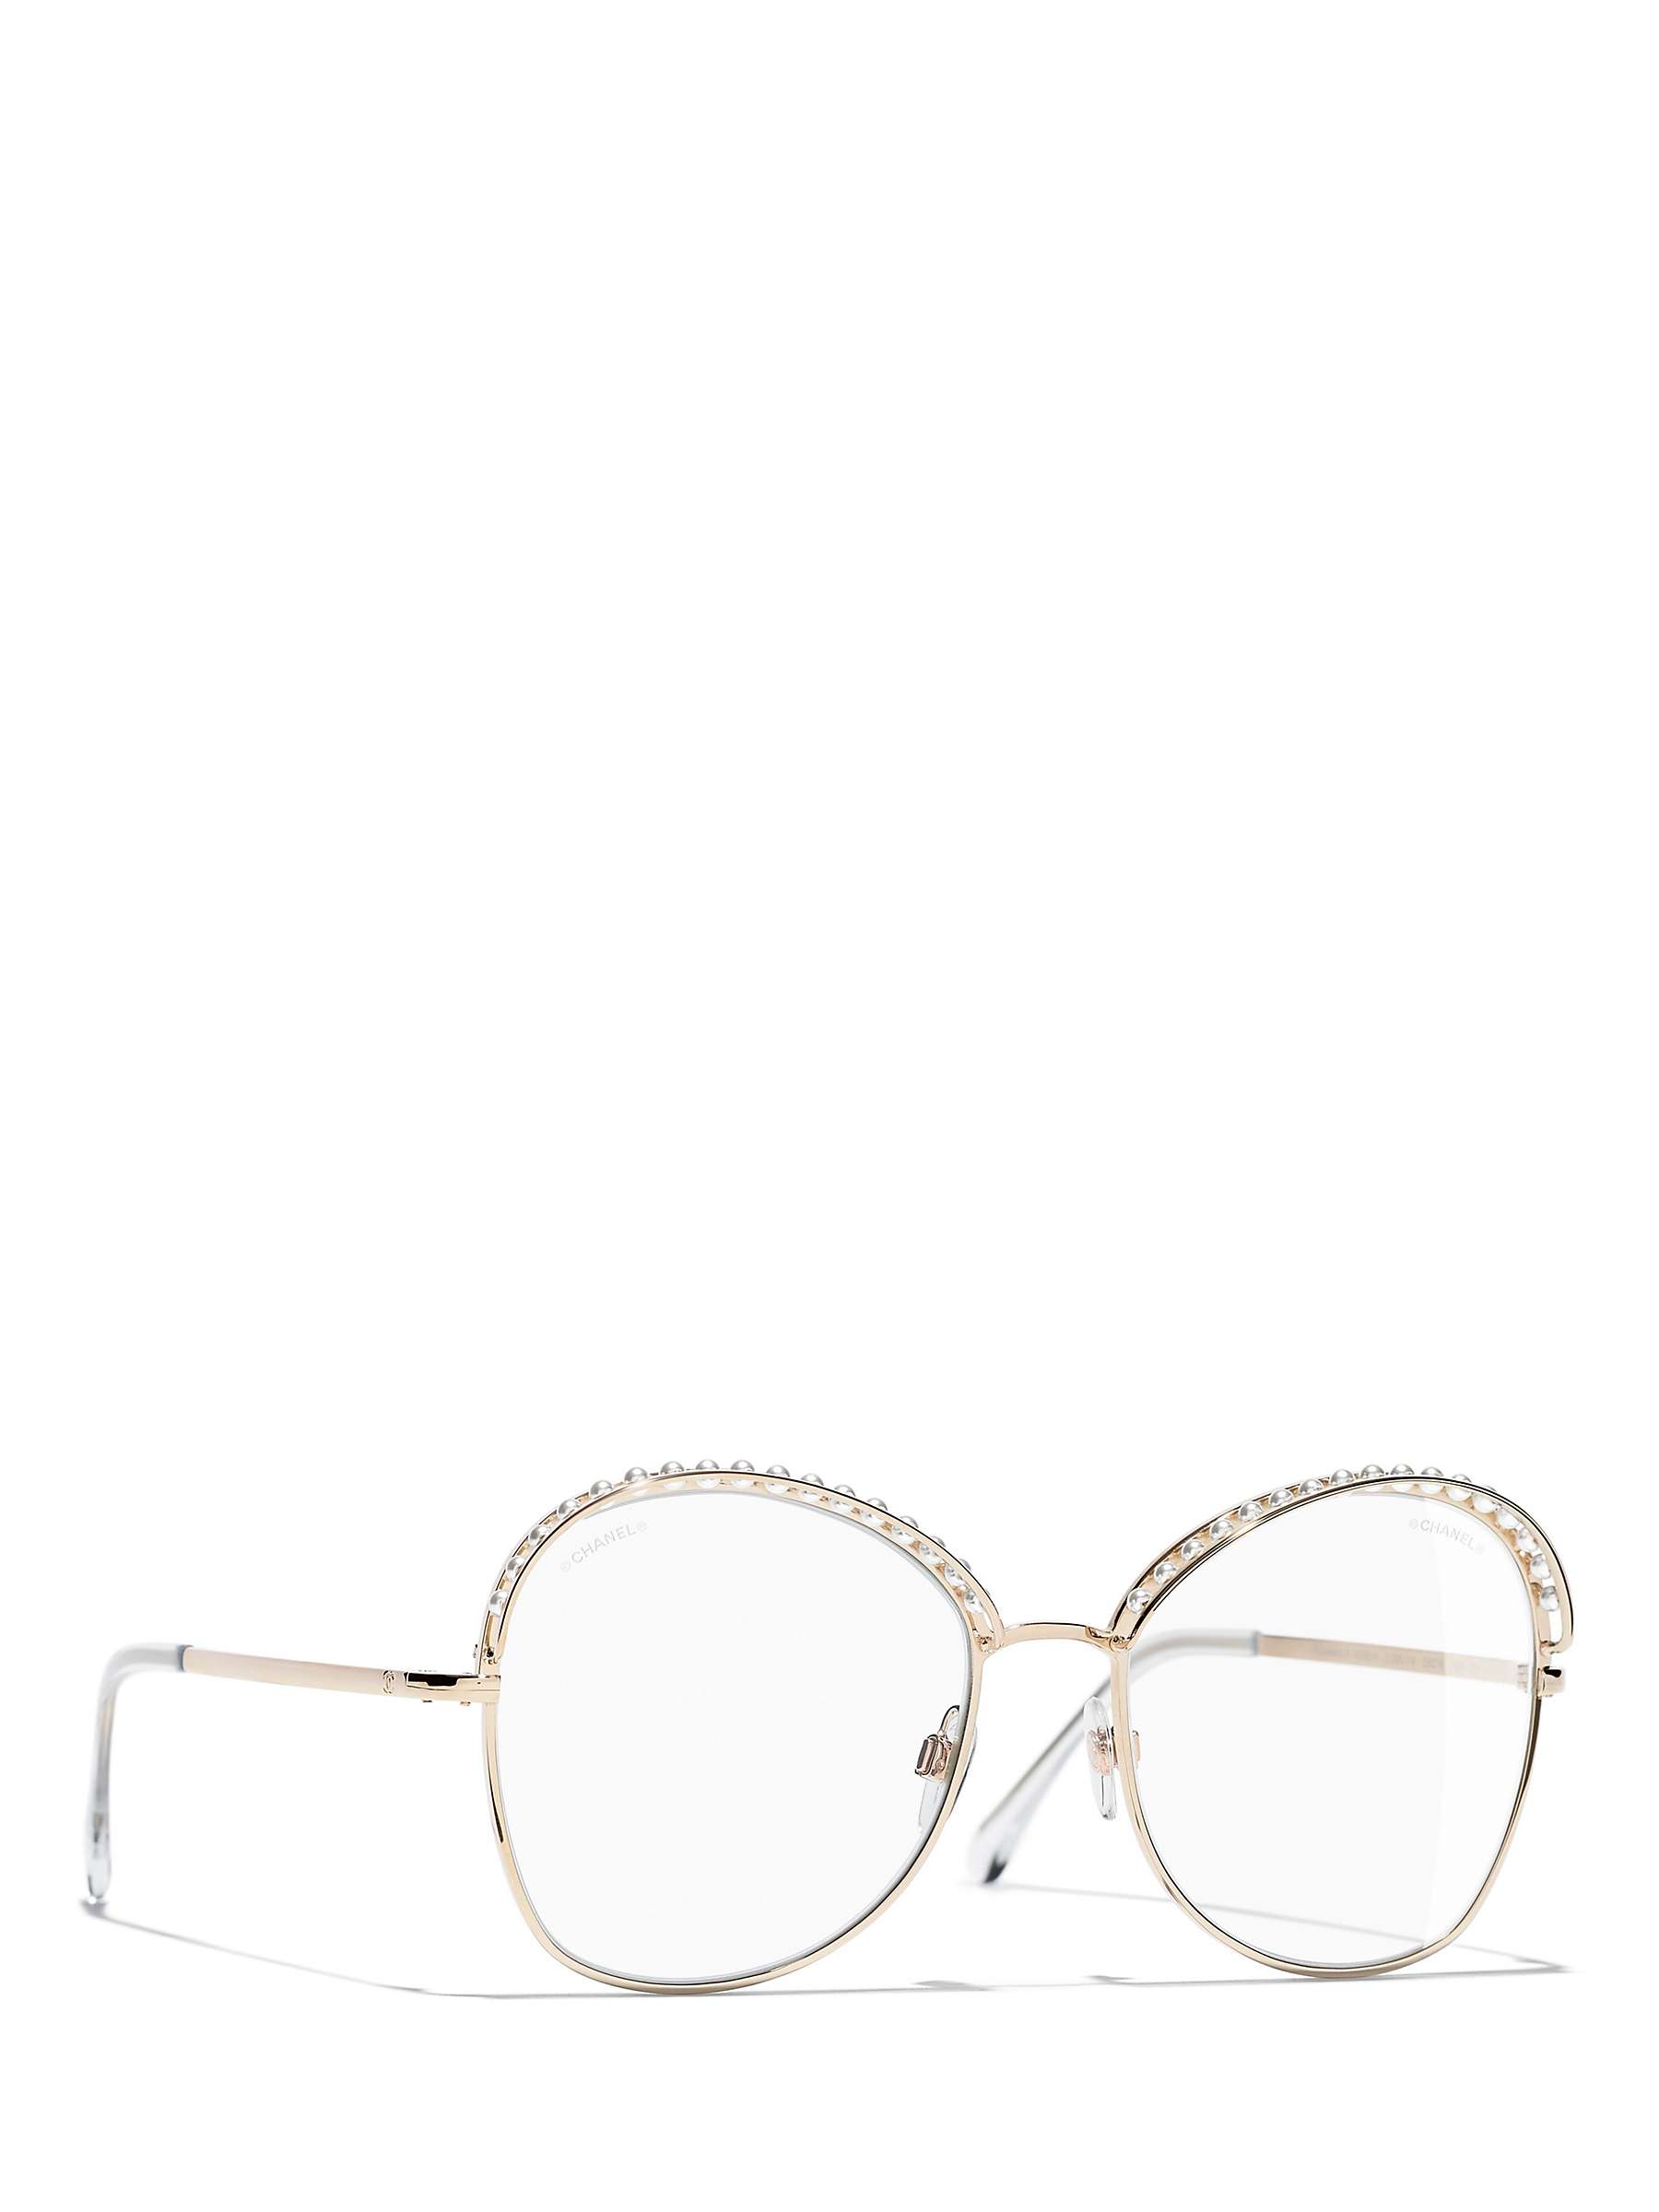 Buy CHANEL Round Sunglasses CH4246H Gold/Clear Online at johnlewis.com